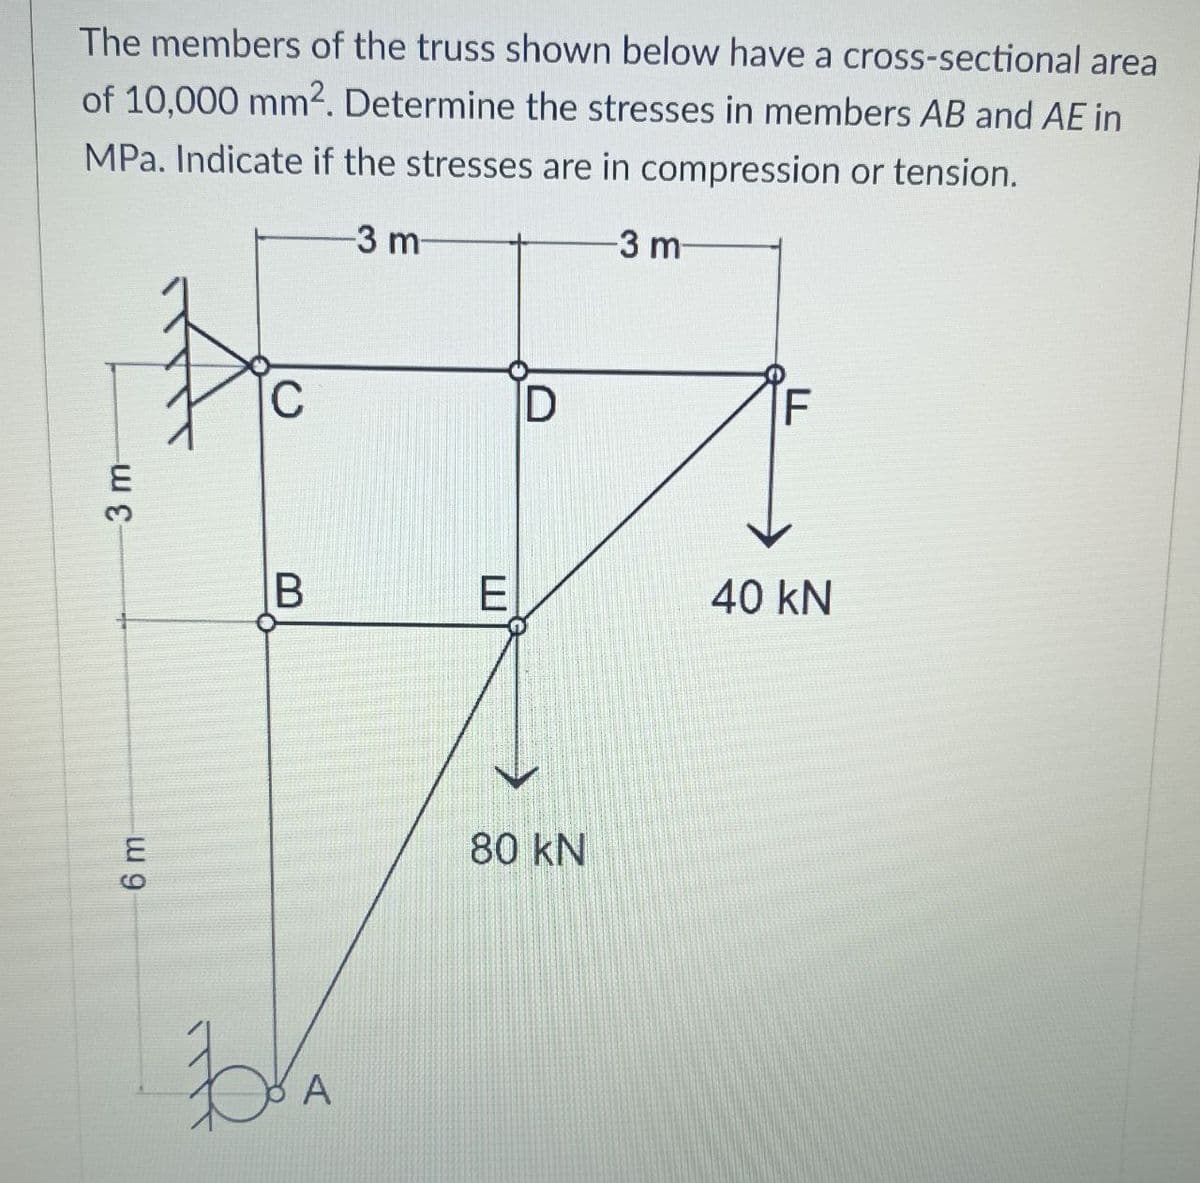 The members of the truss shown below have a cross-sectional area
of 10,000 mm². Determine the stresses in members AB and AE in
MPa. Indicate if the stresses are in compression or tension.
-3 m-
-3 m-
C
F
E
40 kN
80 kN
A
3 m-
6m-
